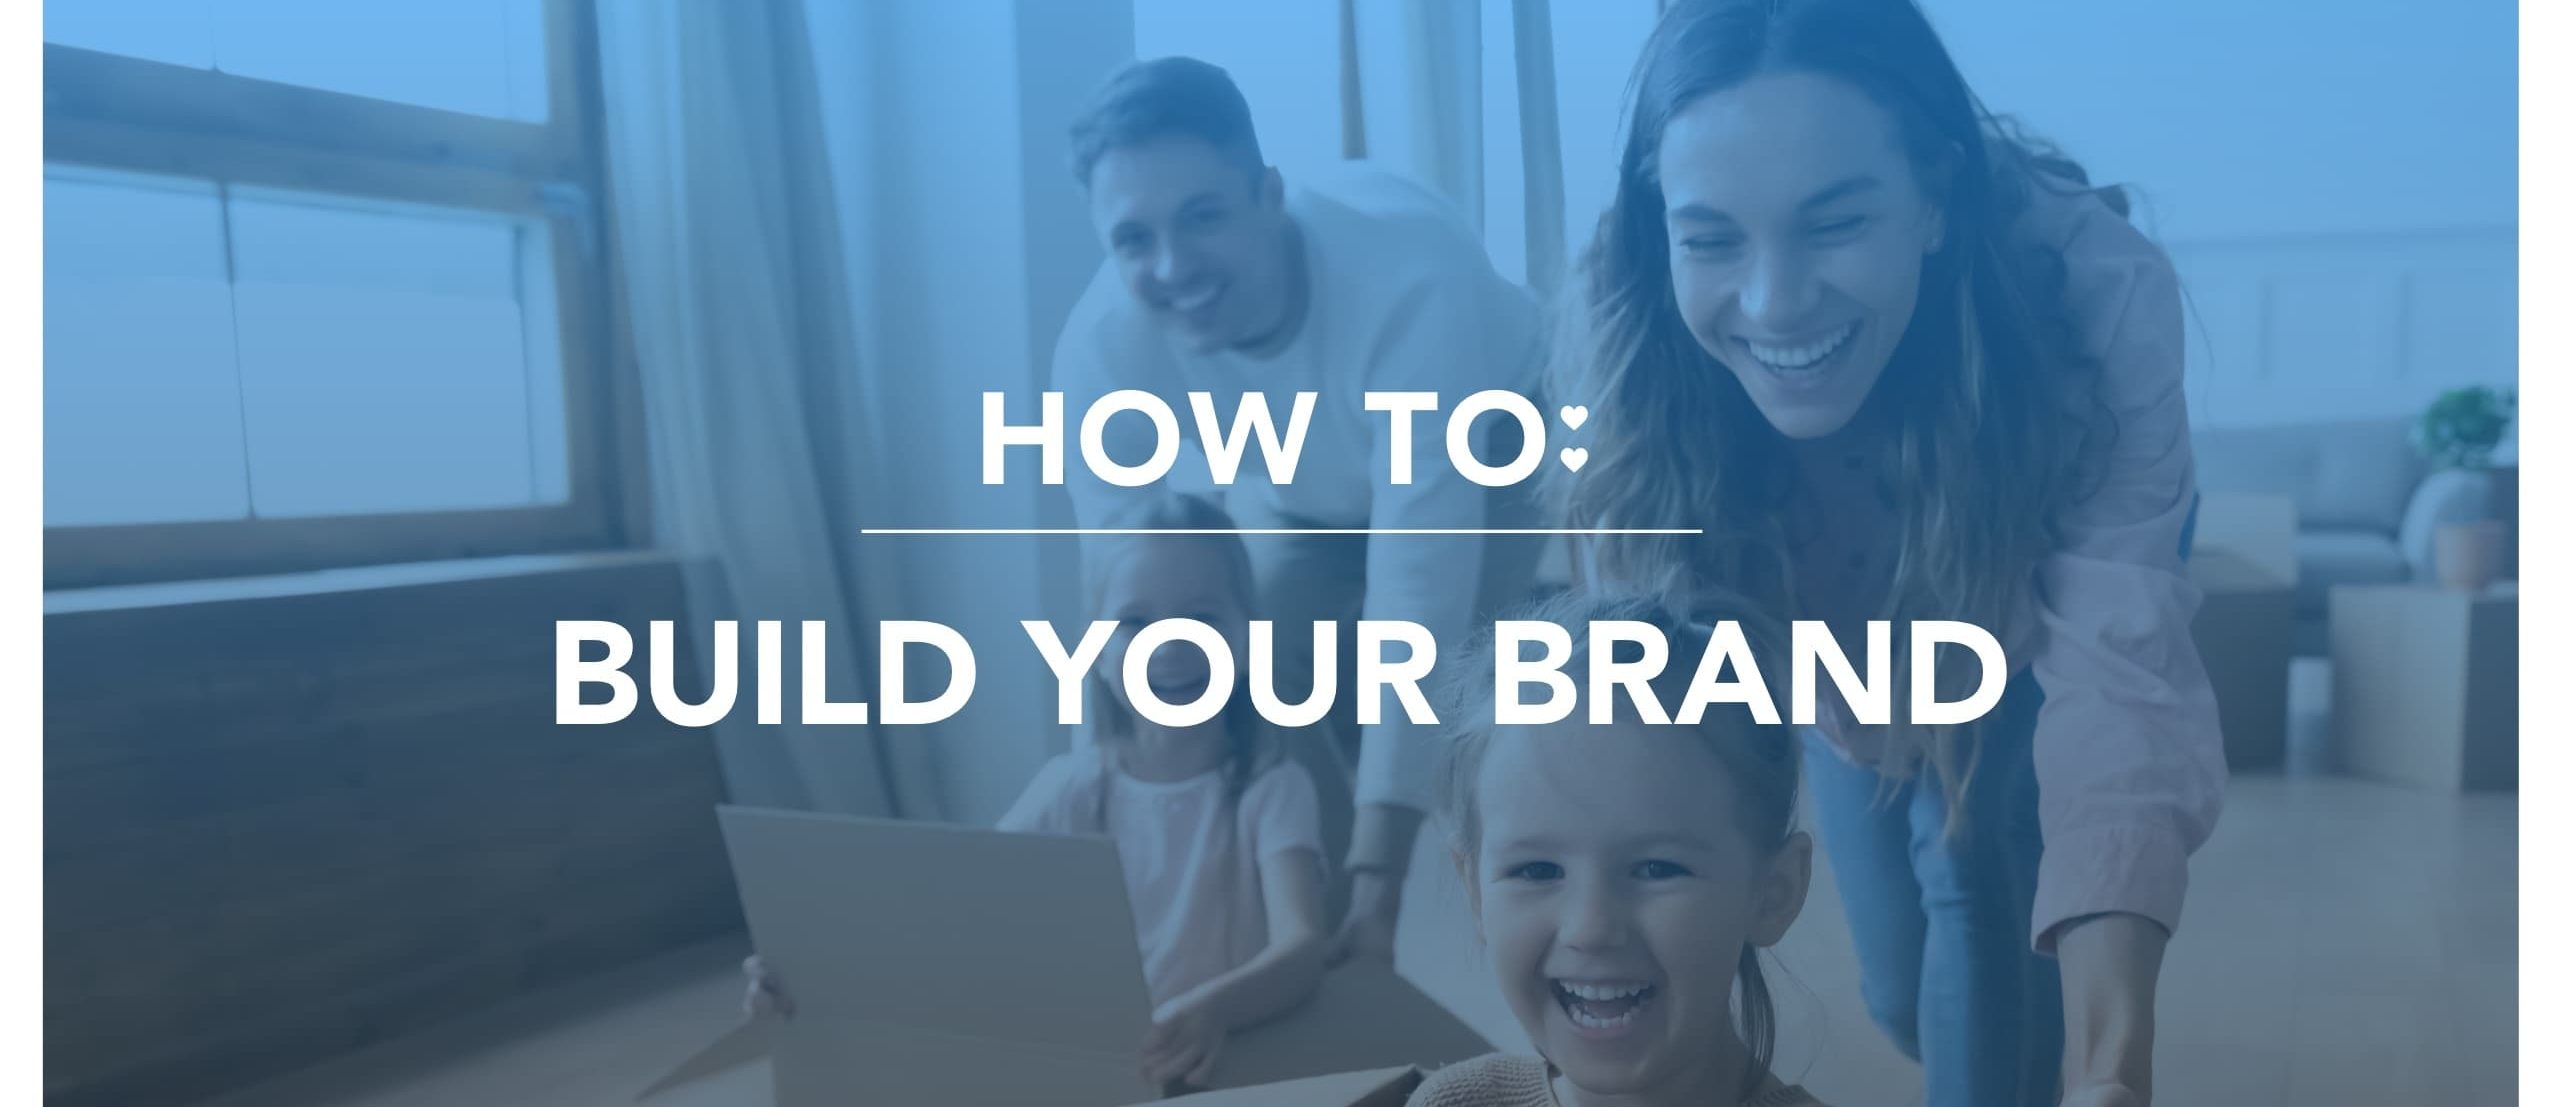 How to Build Your Brand Online Header